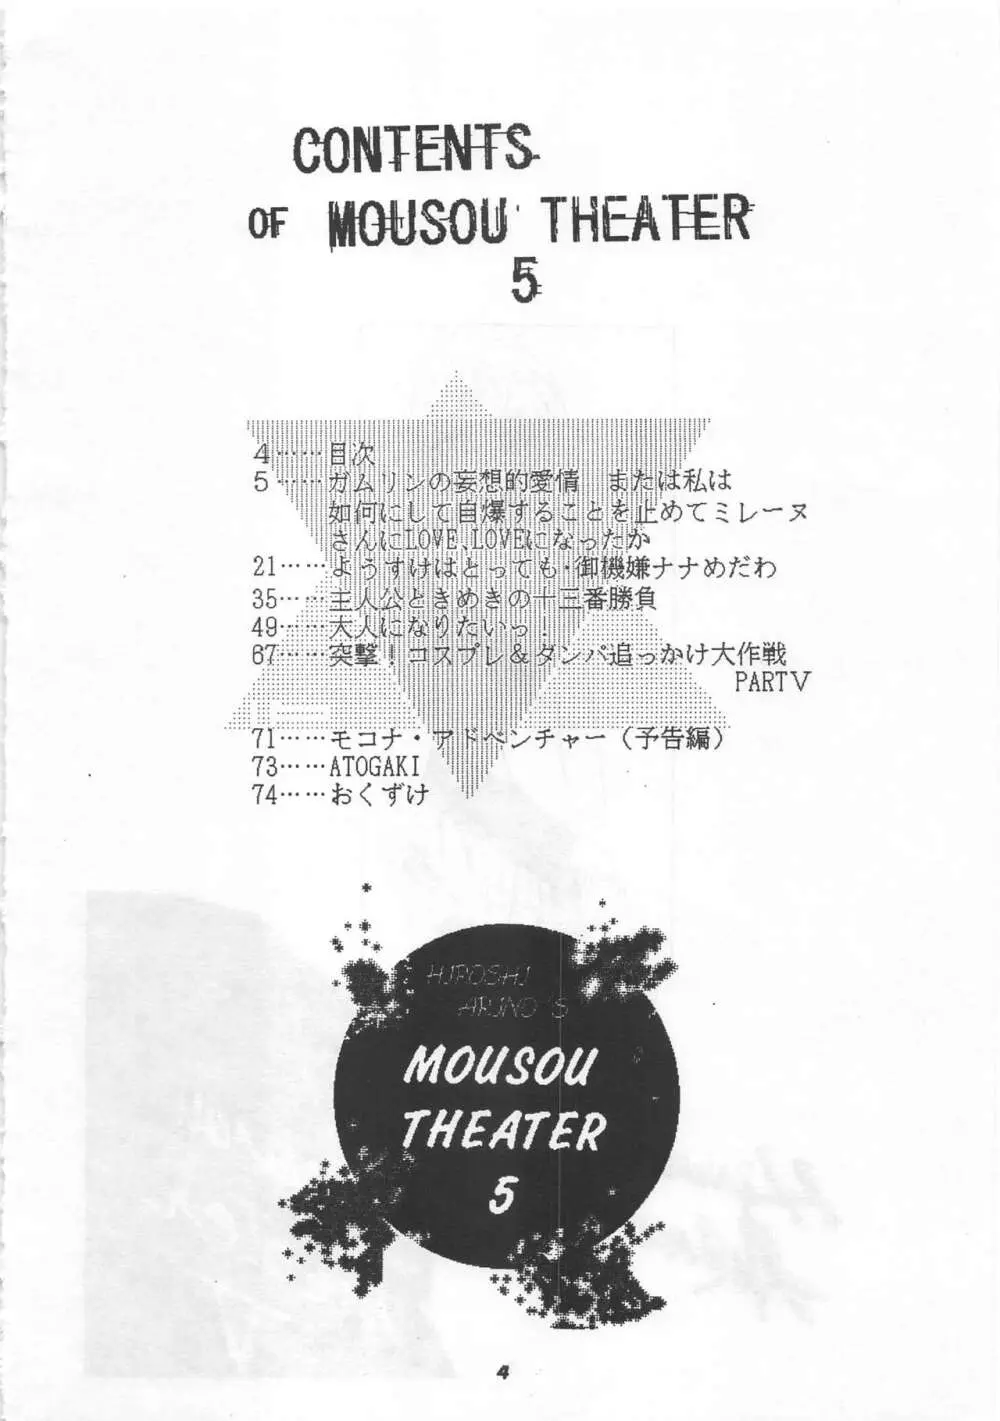 MOUSOU THEATER 5 4ページ